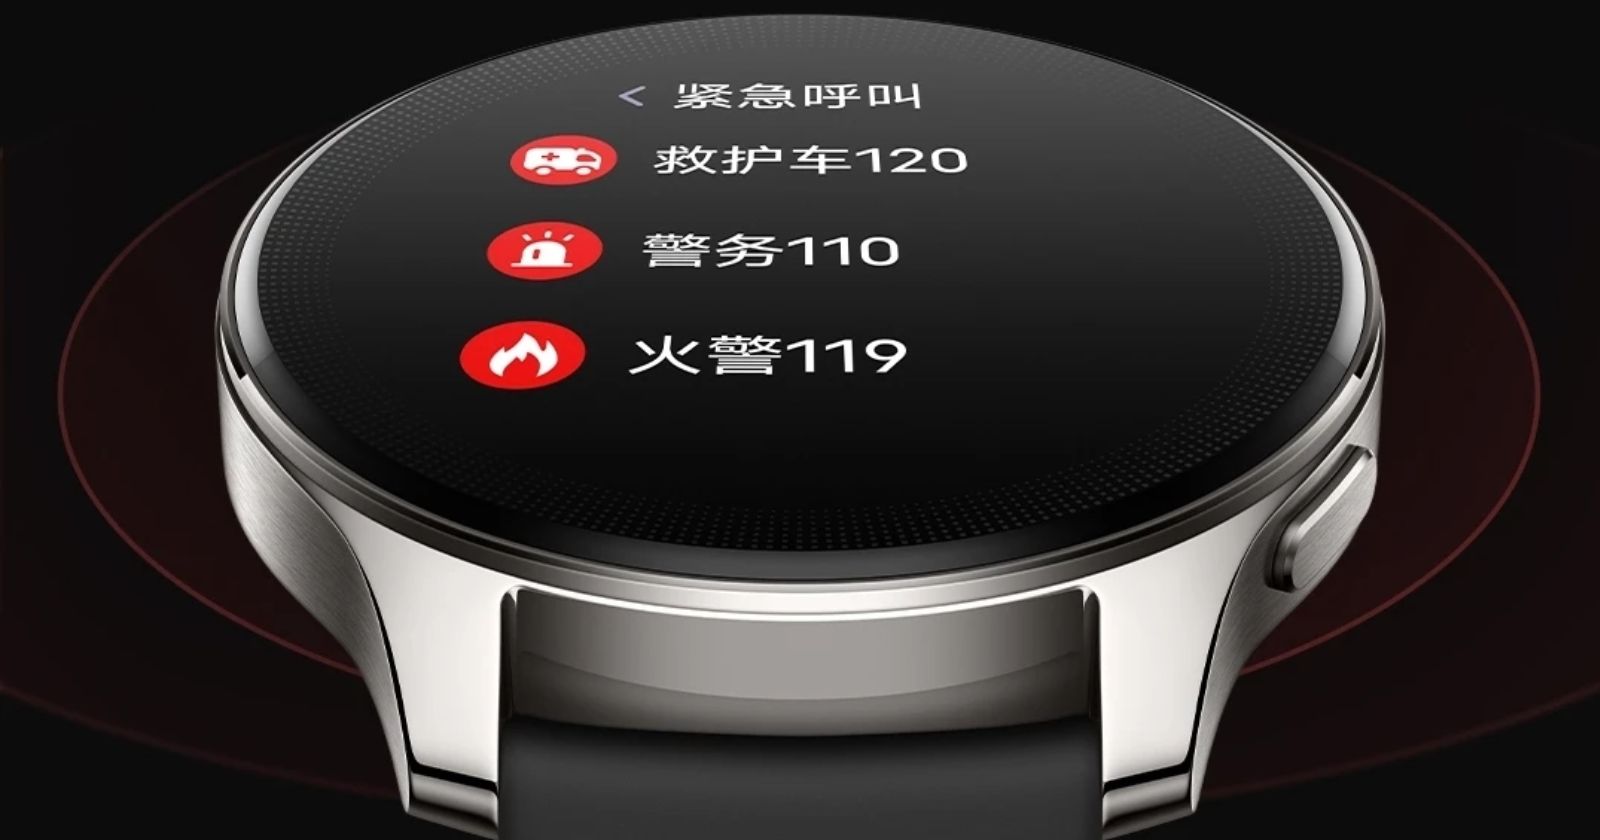 The design and features of Vivo Watch 3 have been revealed!